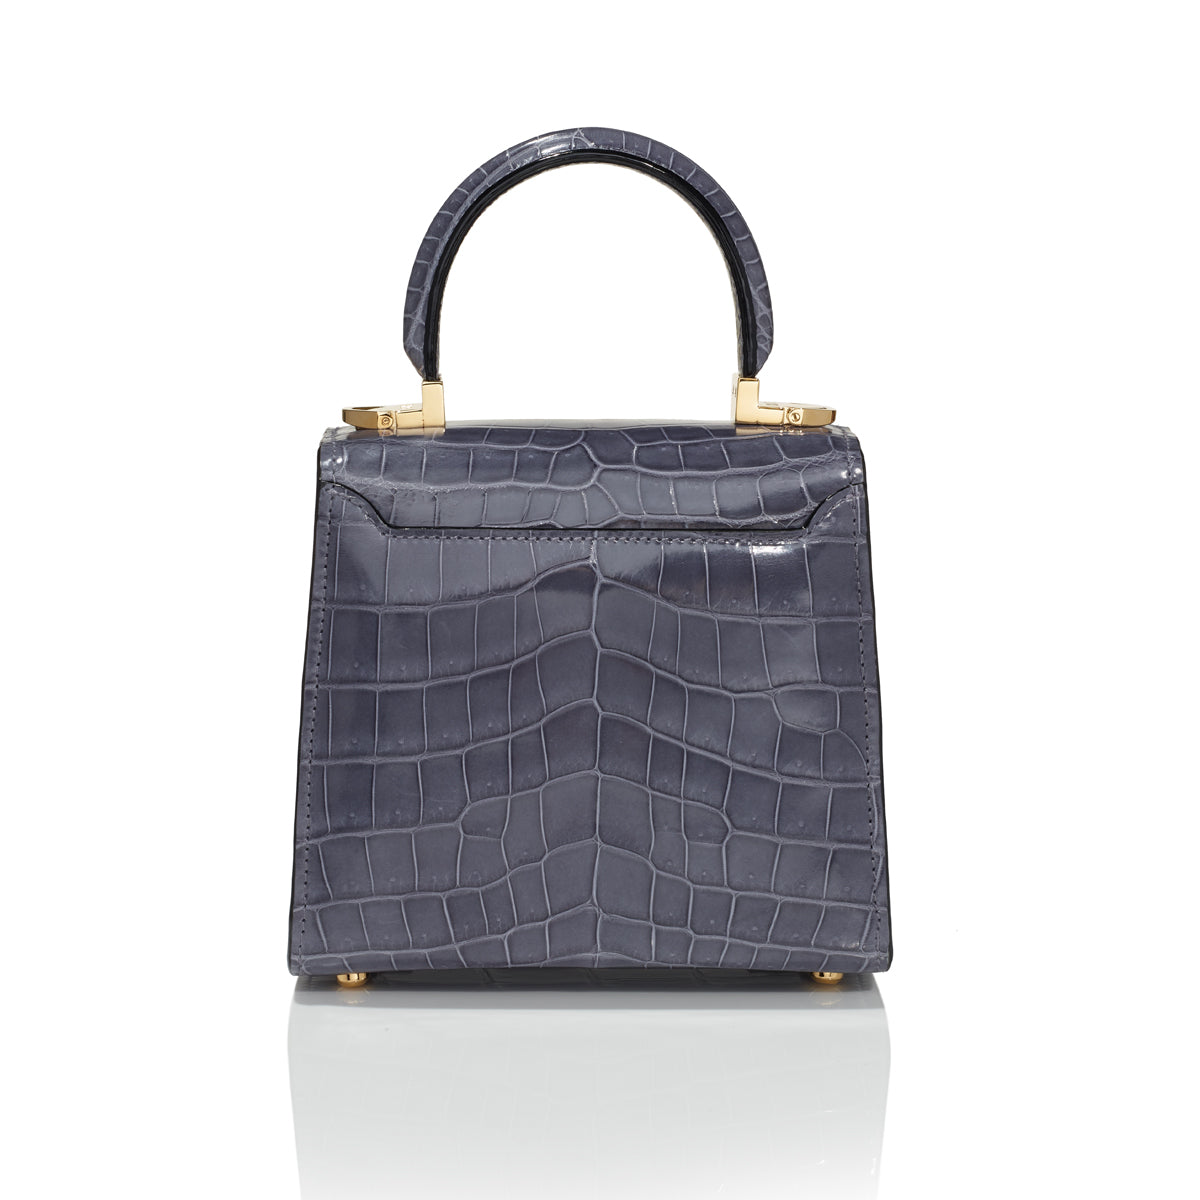 STALVEY Trapezoid 1.55 Mini in Denim Alligator with 24kt Gold Hardware Back View